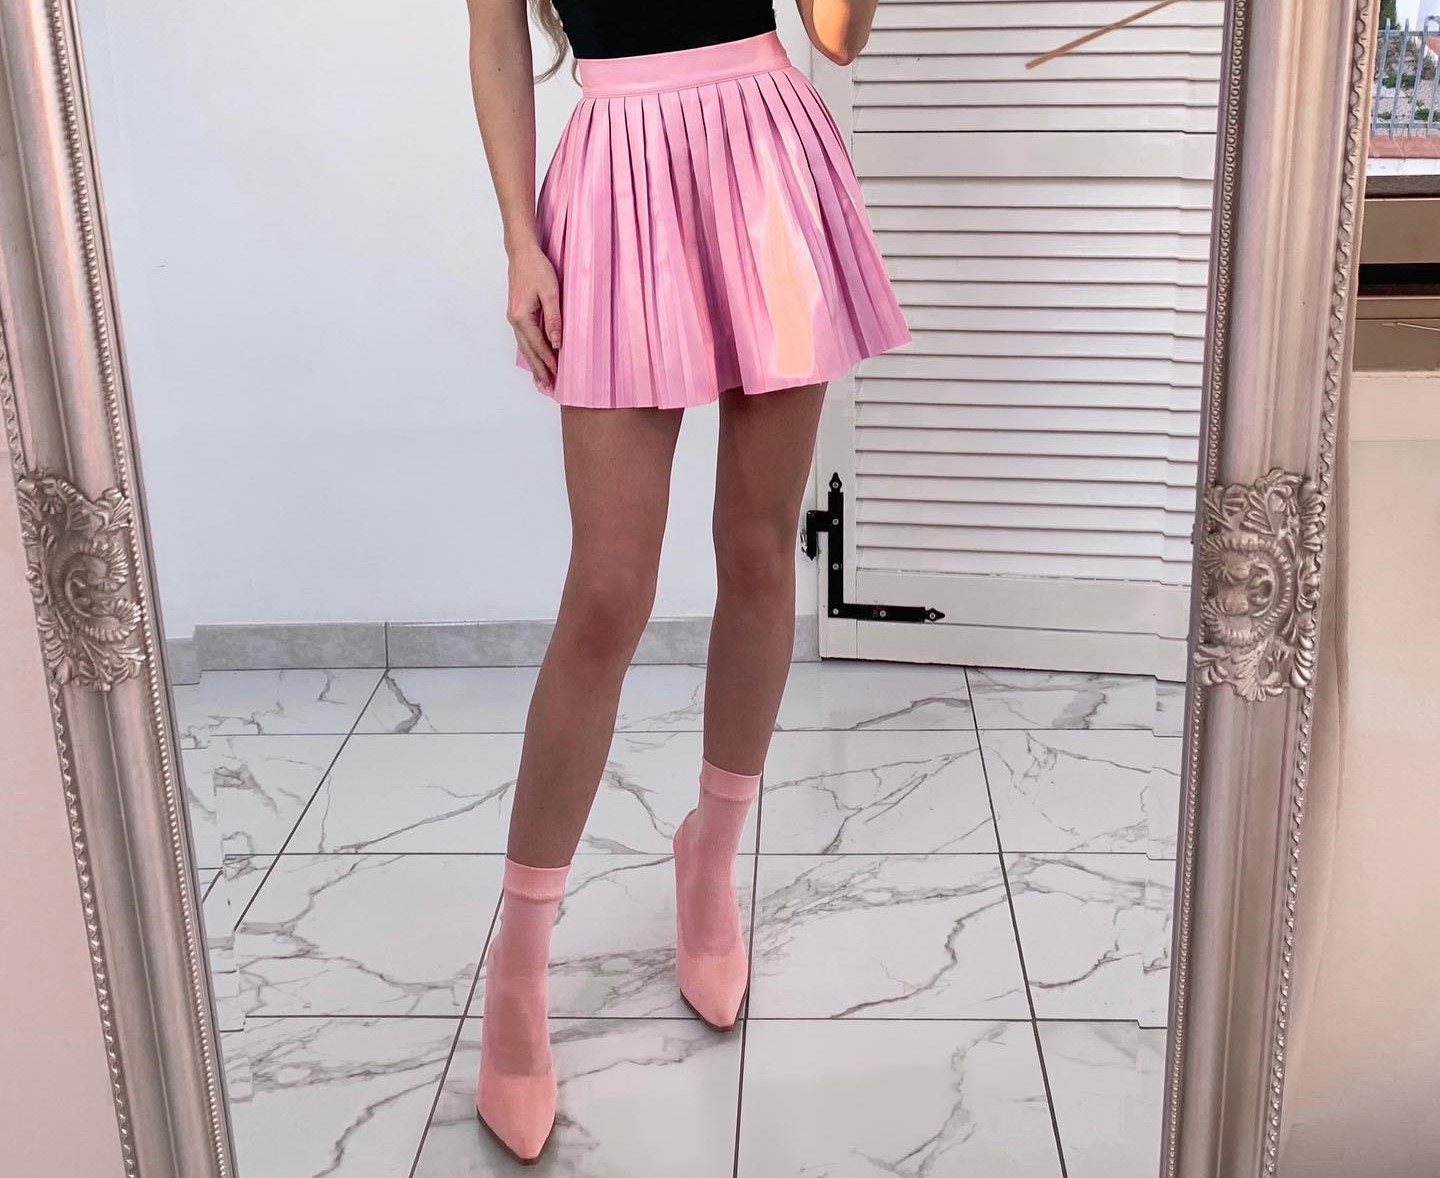 A fashionable woman matches a pink skater skirt with pink boots